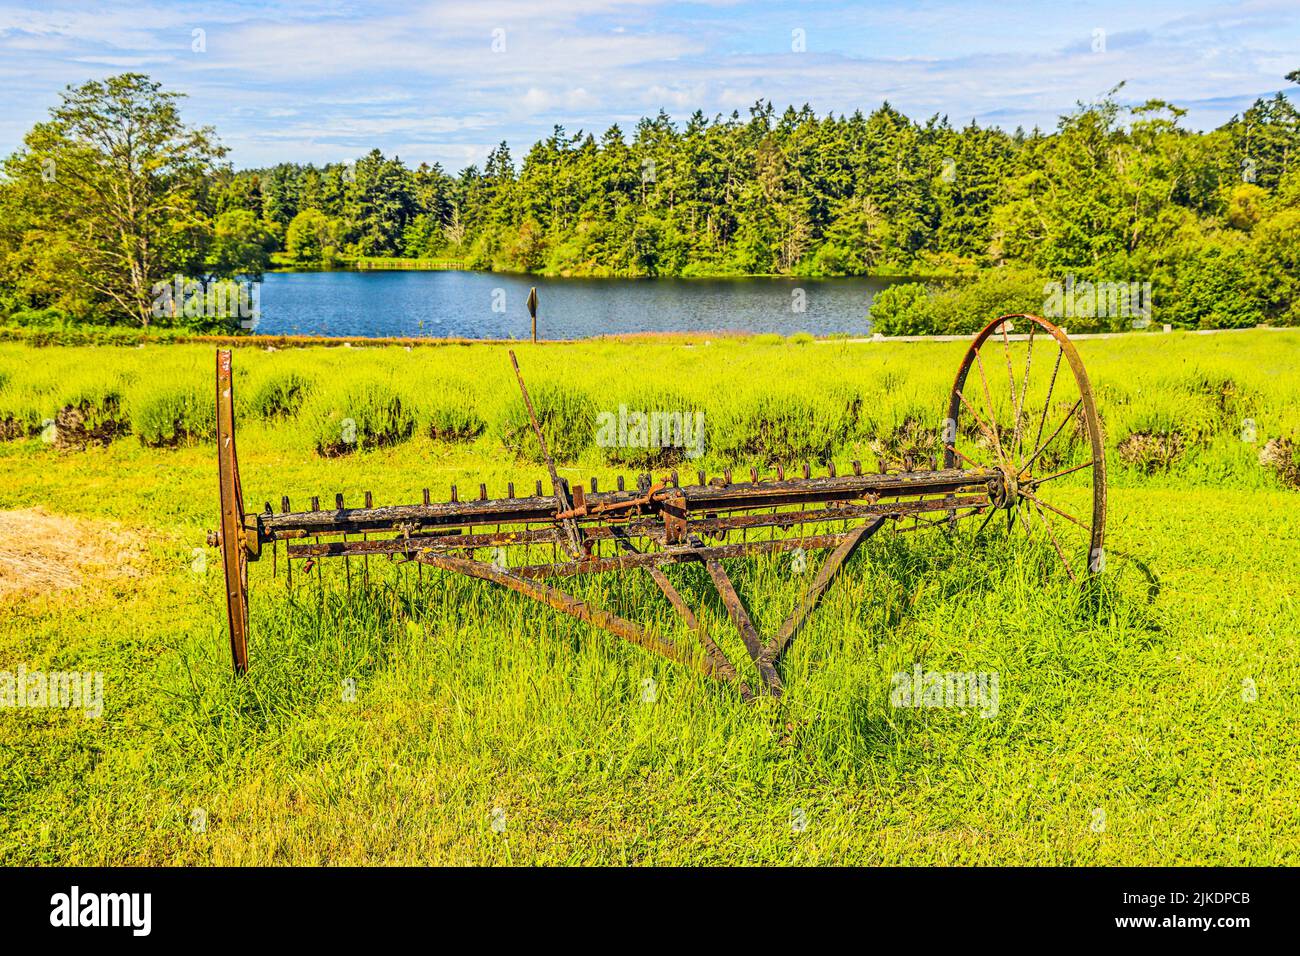 Old farm implement in a field. Antique hay rake. Stock Photo